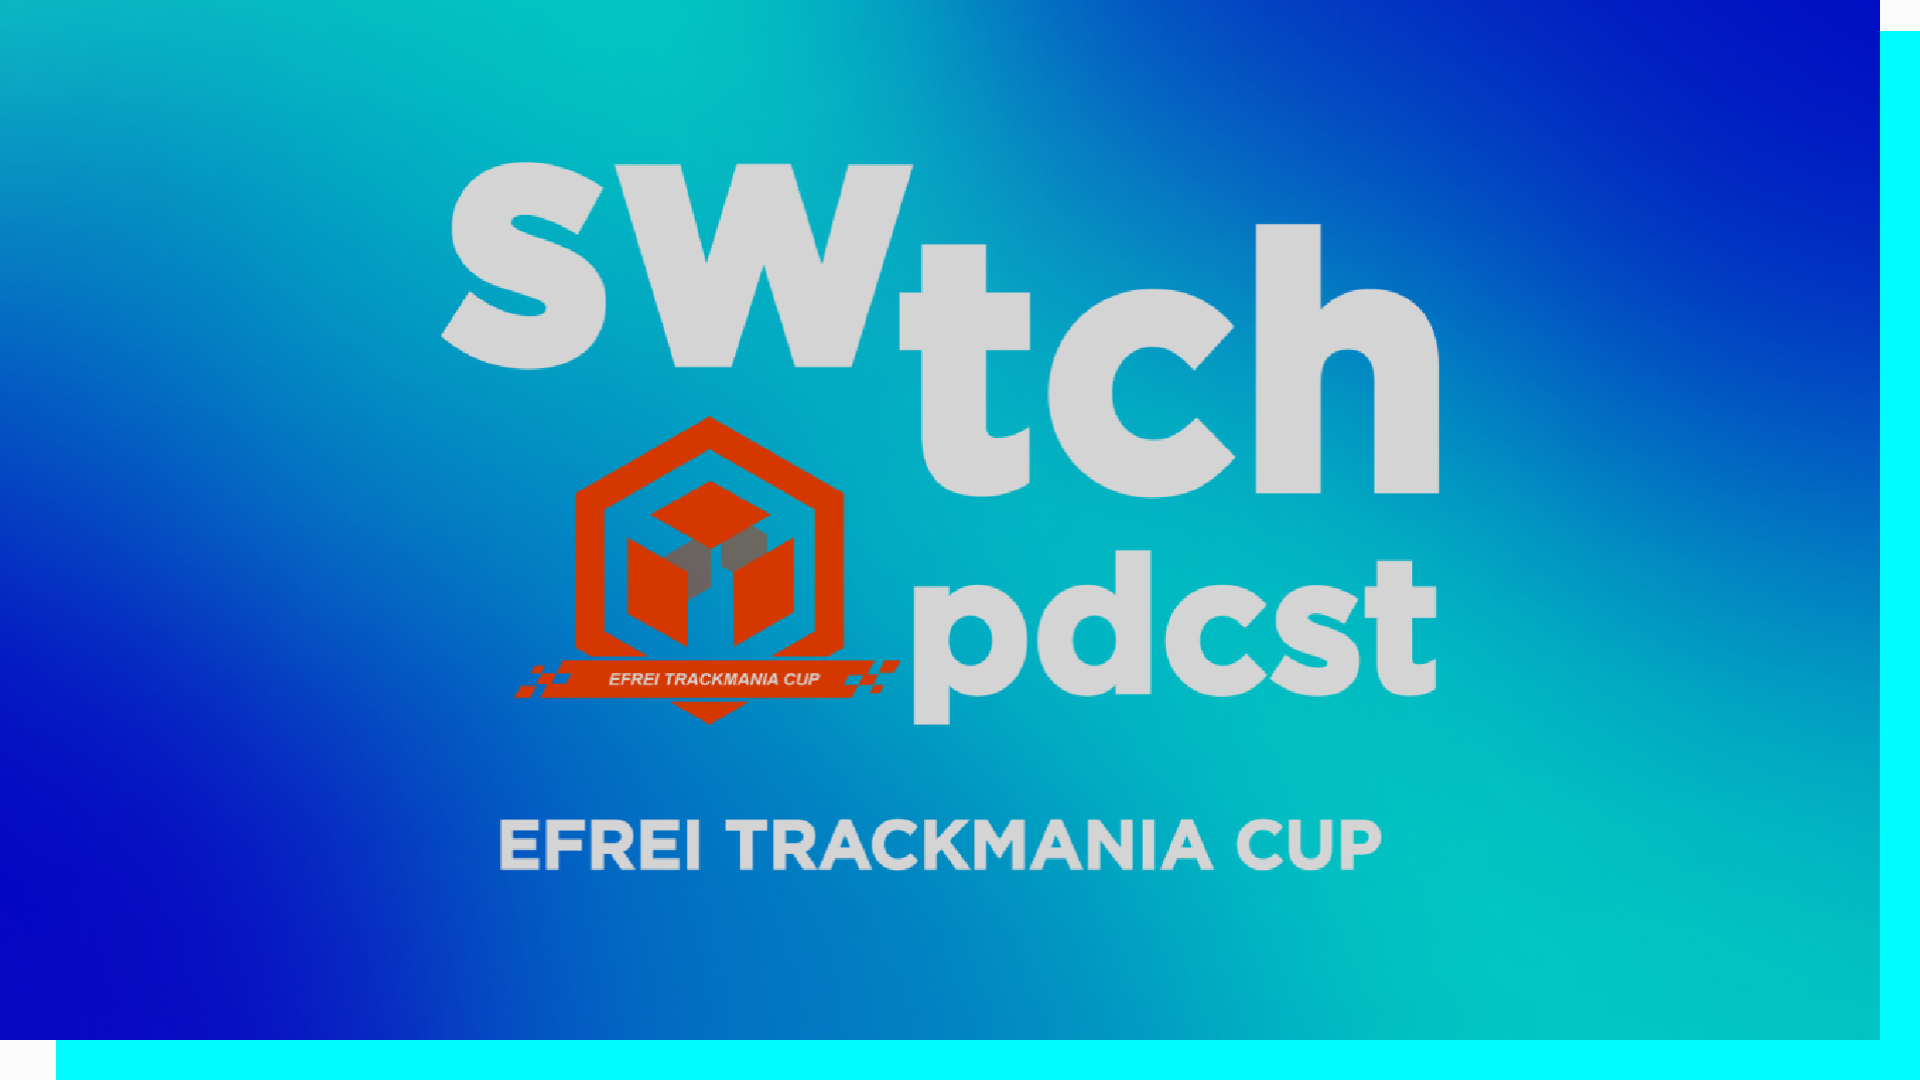 Efrei_Trackmania_Cup_LAN